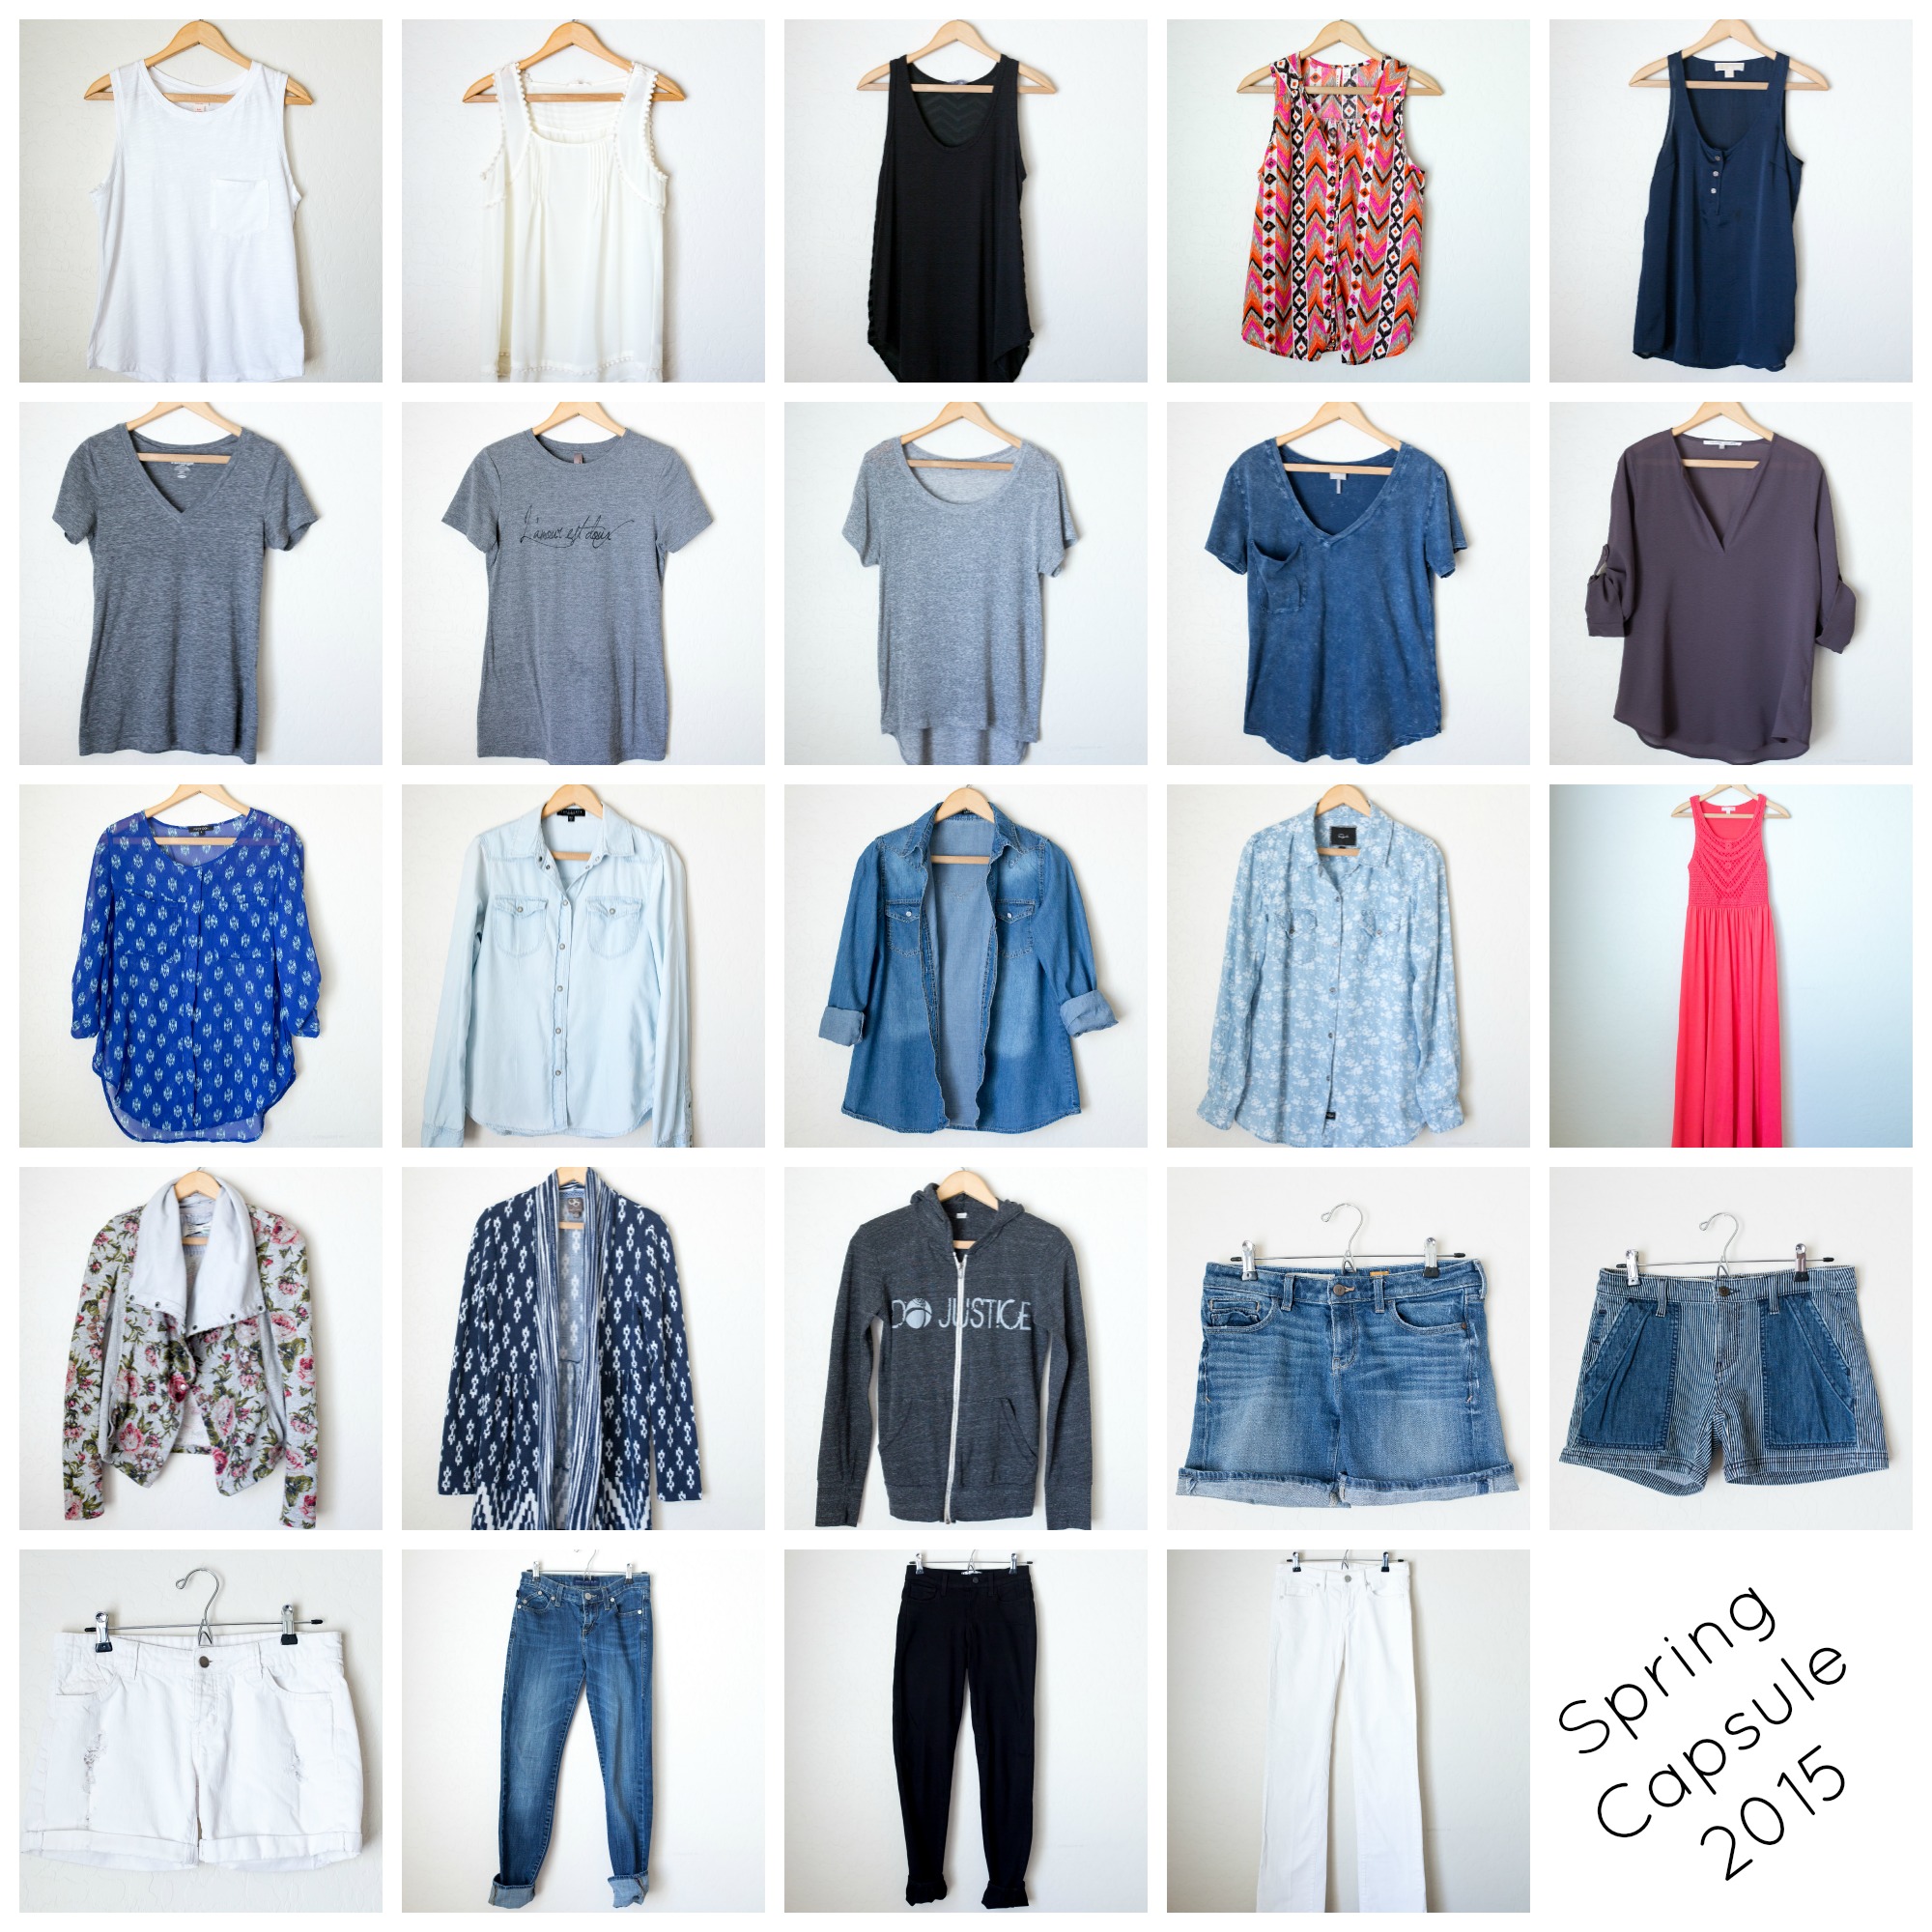 How to find your style and create a capsule wardrobe. | InspiredRD.com